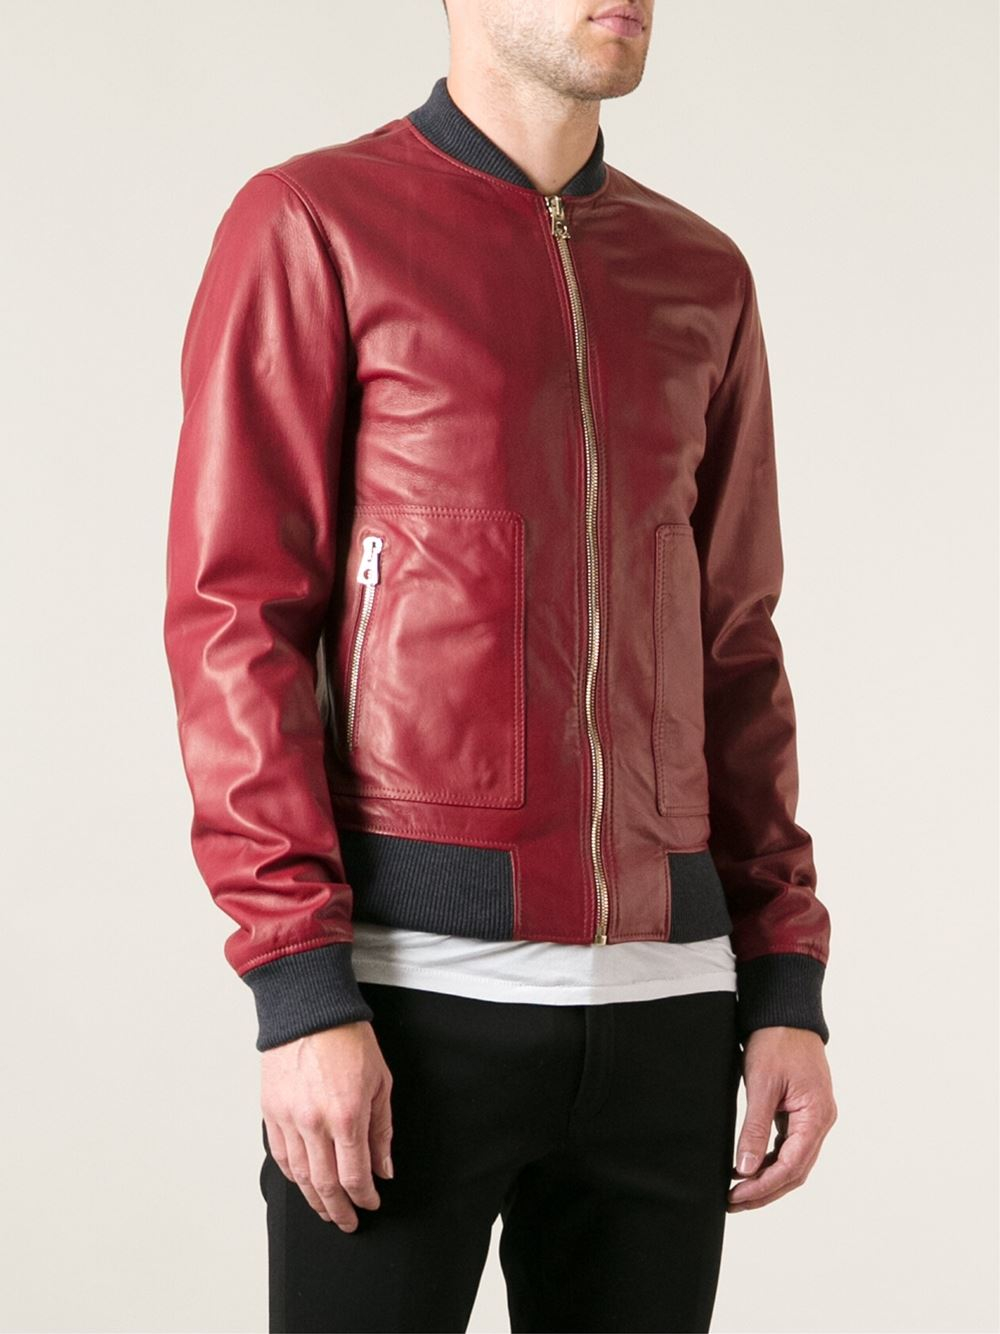 Dolce & Gabbana Classic Bomber Jacket in Red for Men - Lyst